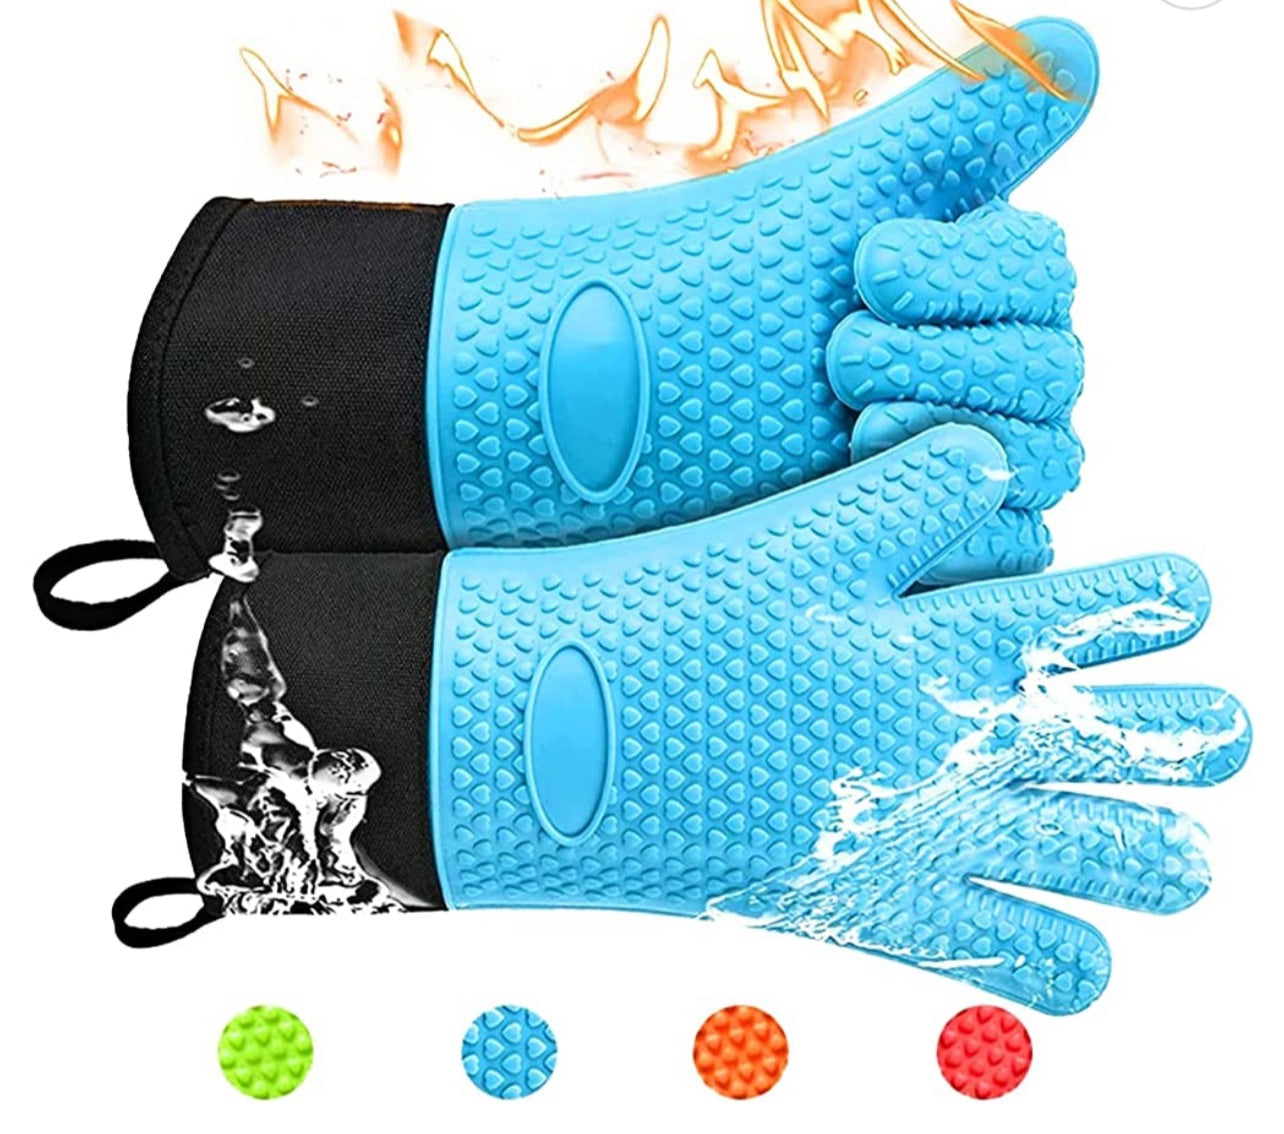 Kitchen Silicone Heat Resistant Gloves Oven Grill Pot Holder BBQ Cooking  Mitts